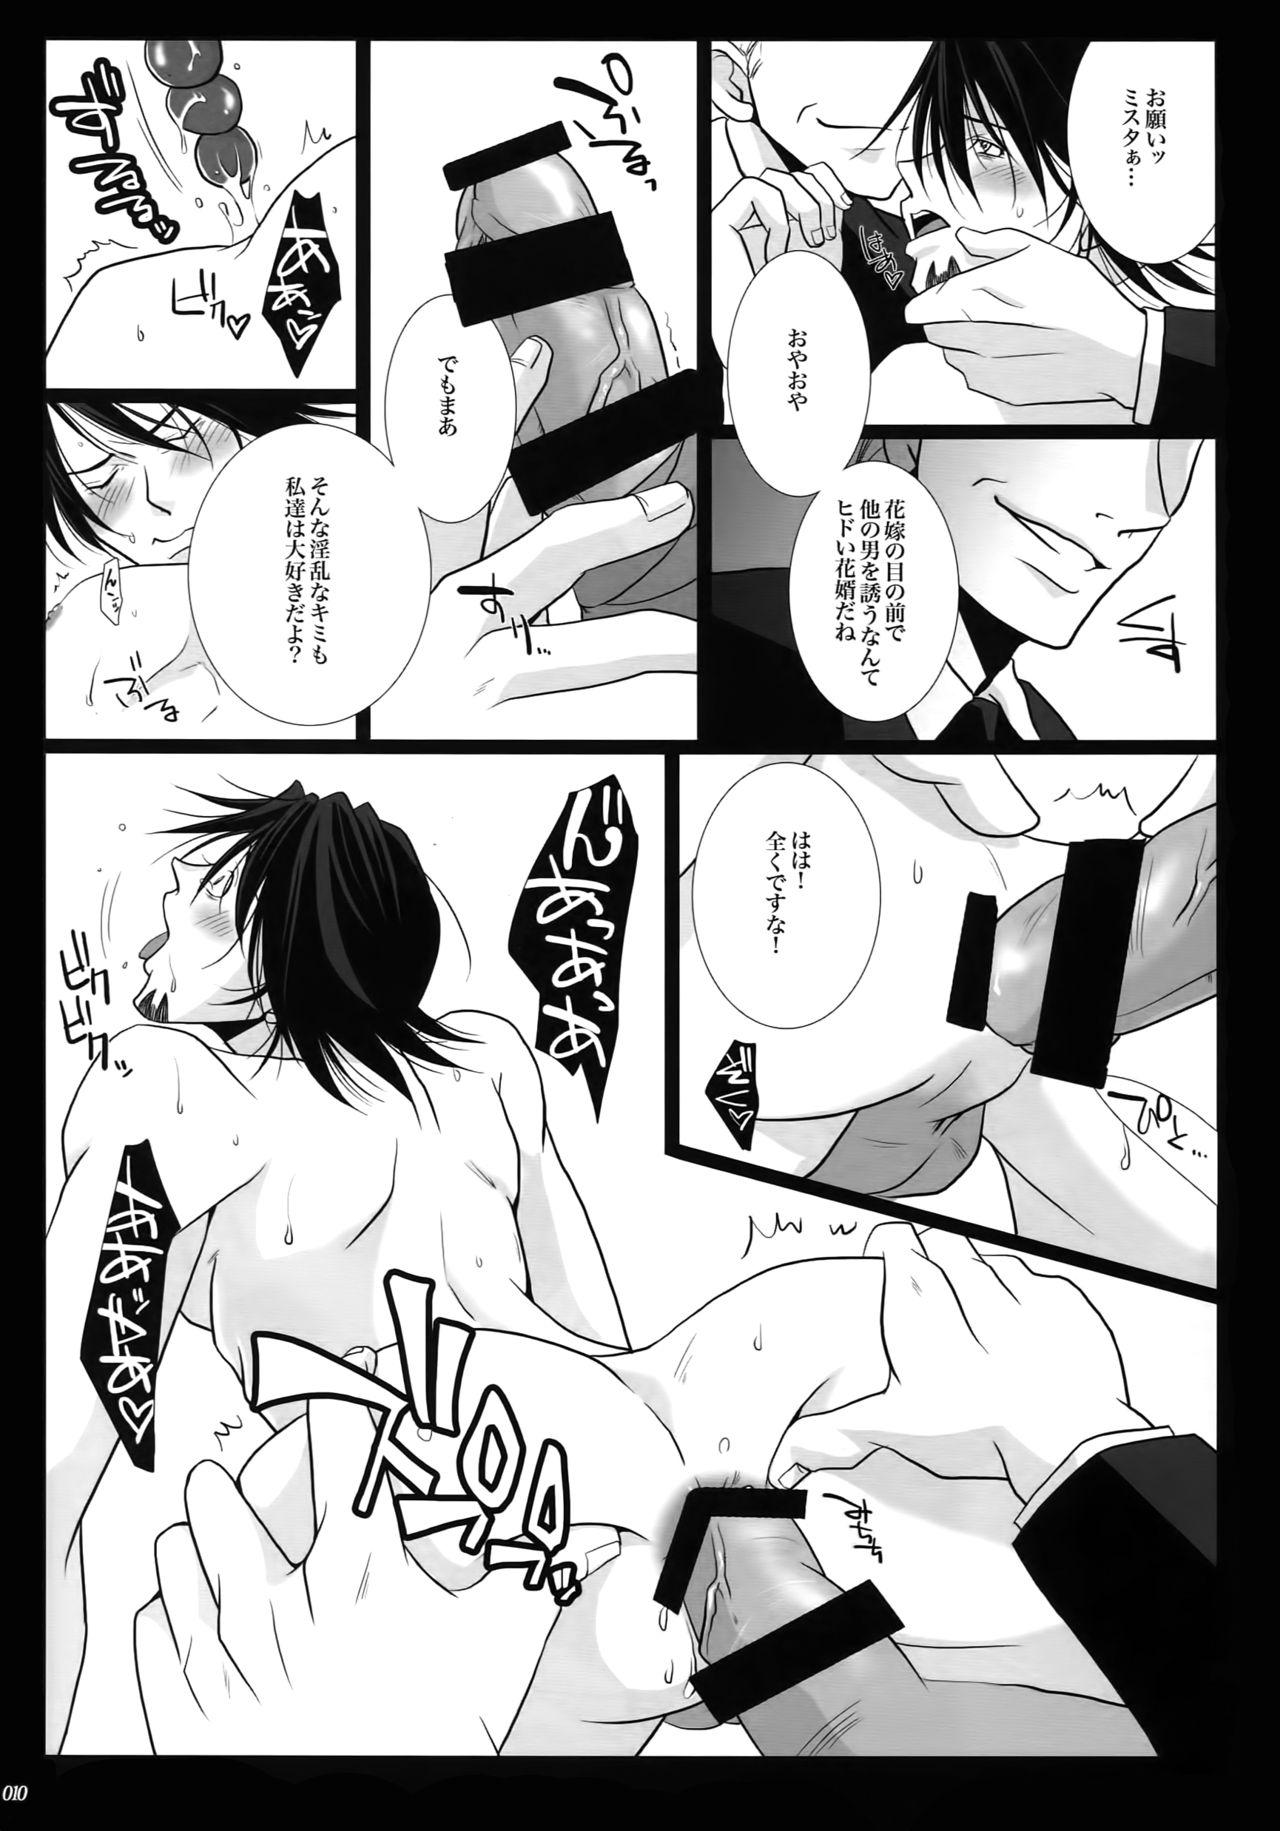 Ghetto mob;Re - Tiger and bunny Sex Tape - Page 9